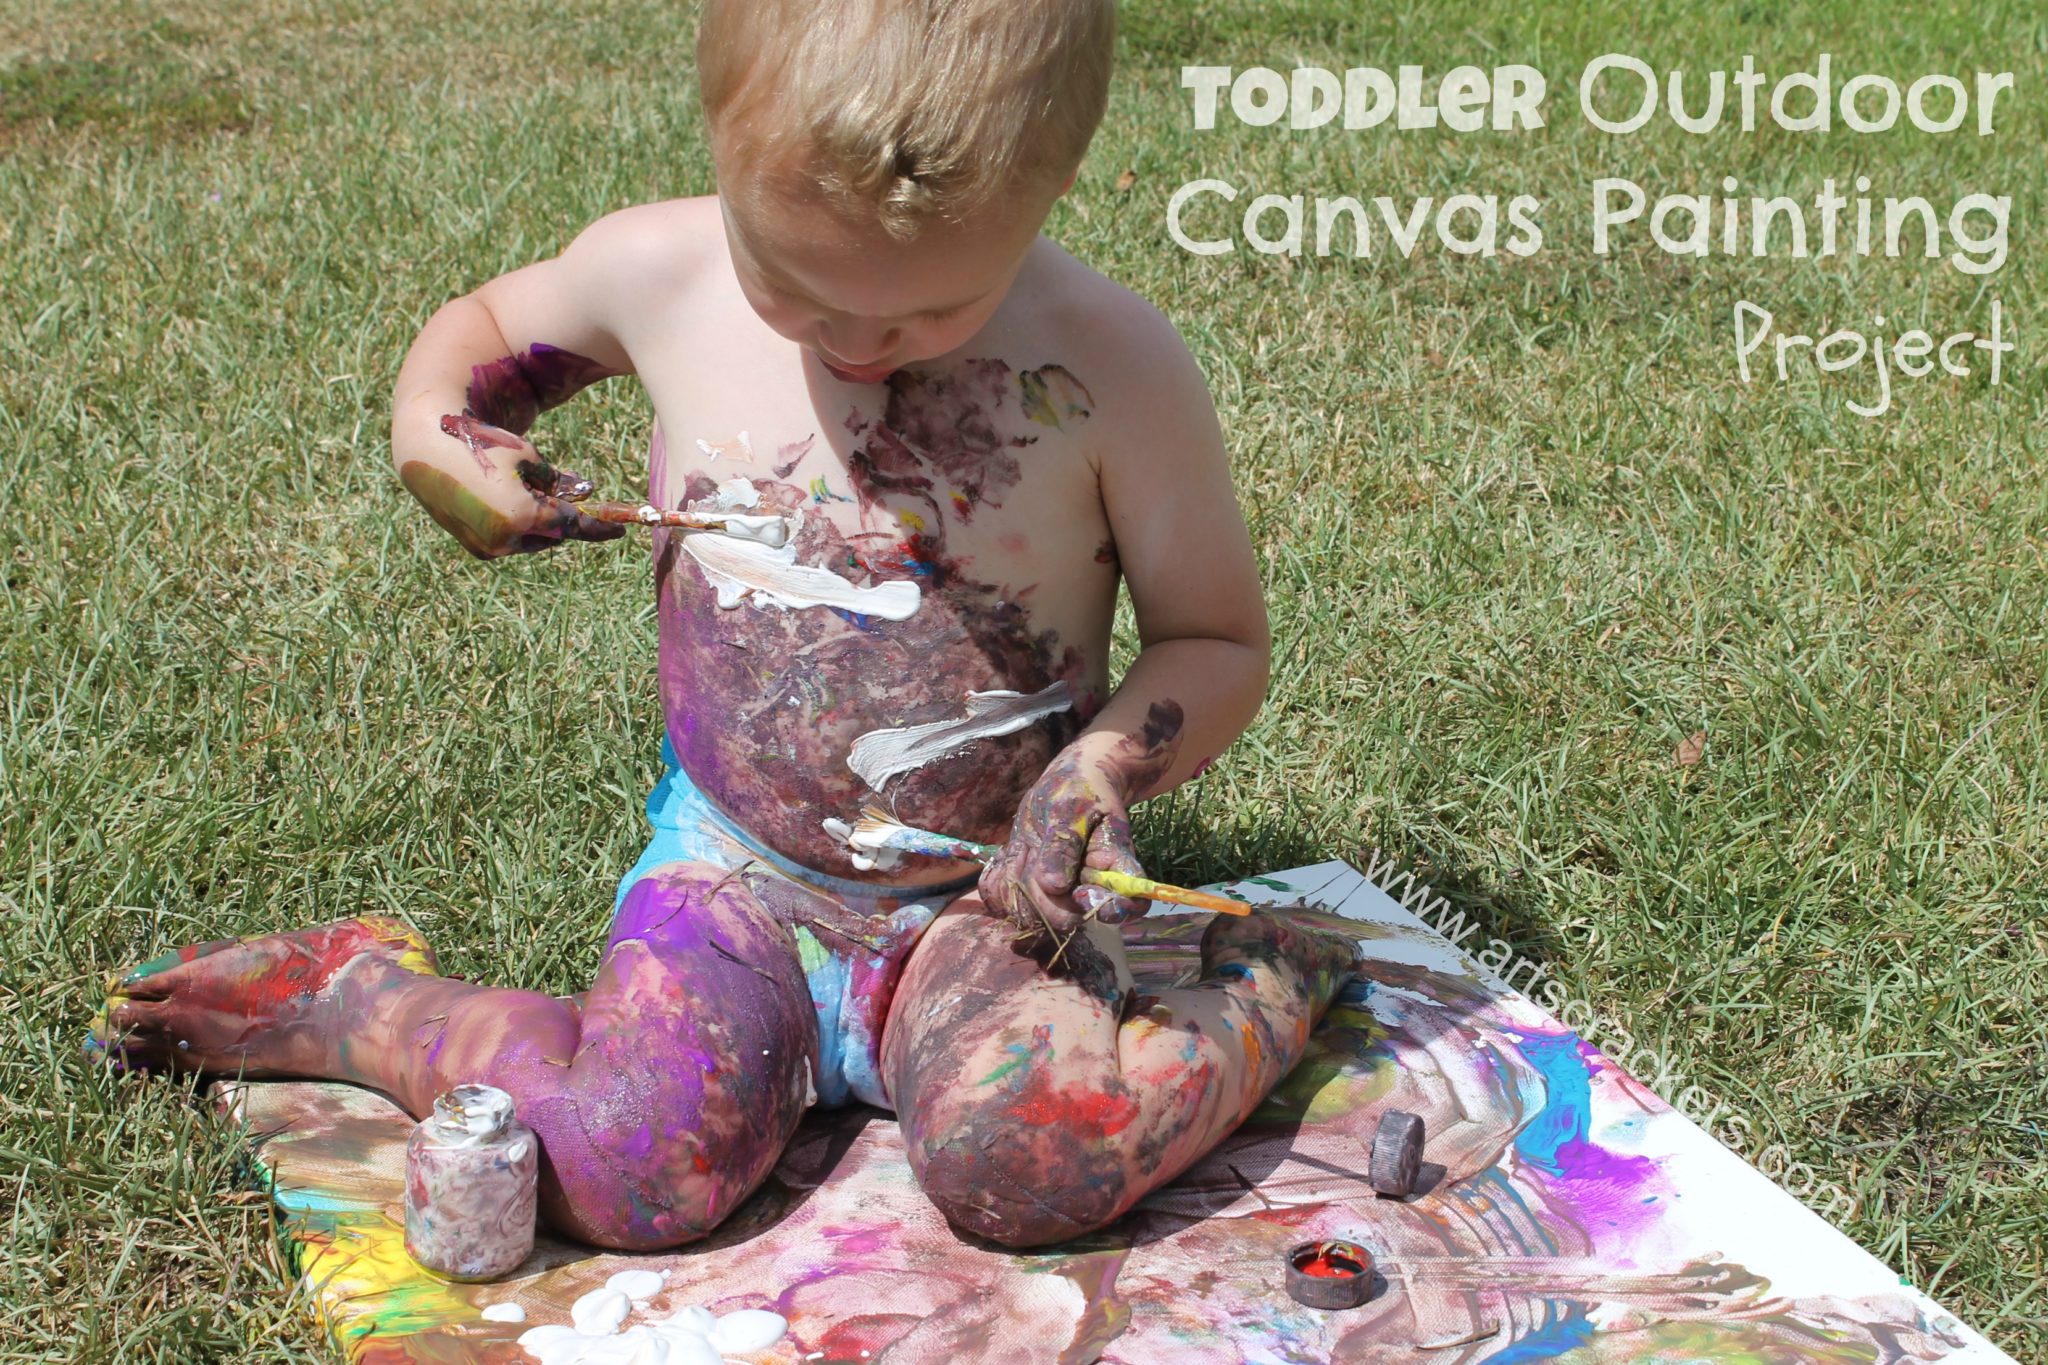 Toddler Outdoor Canvas Painting Project